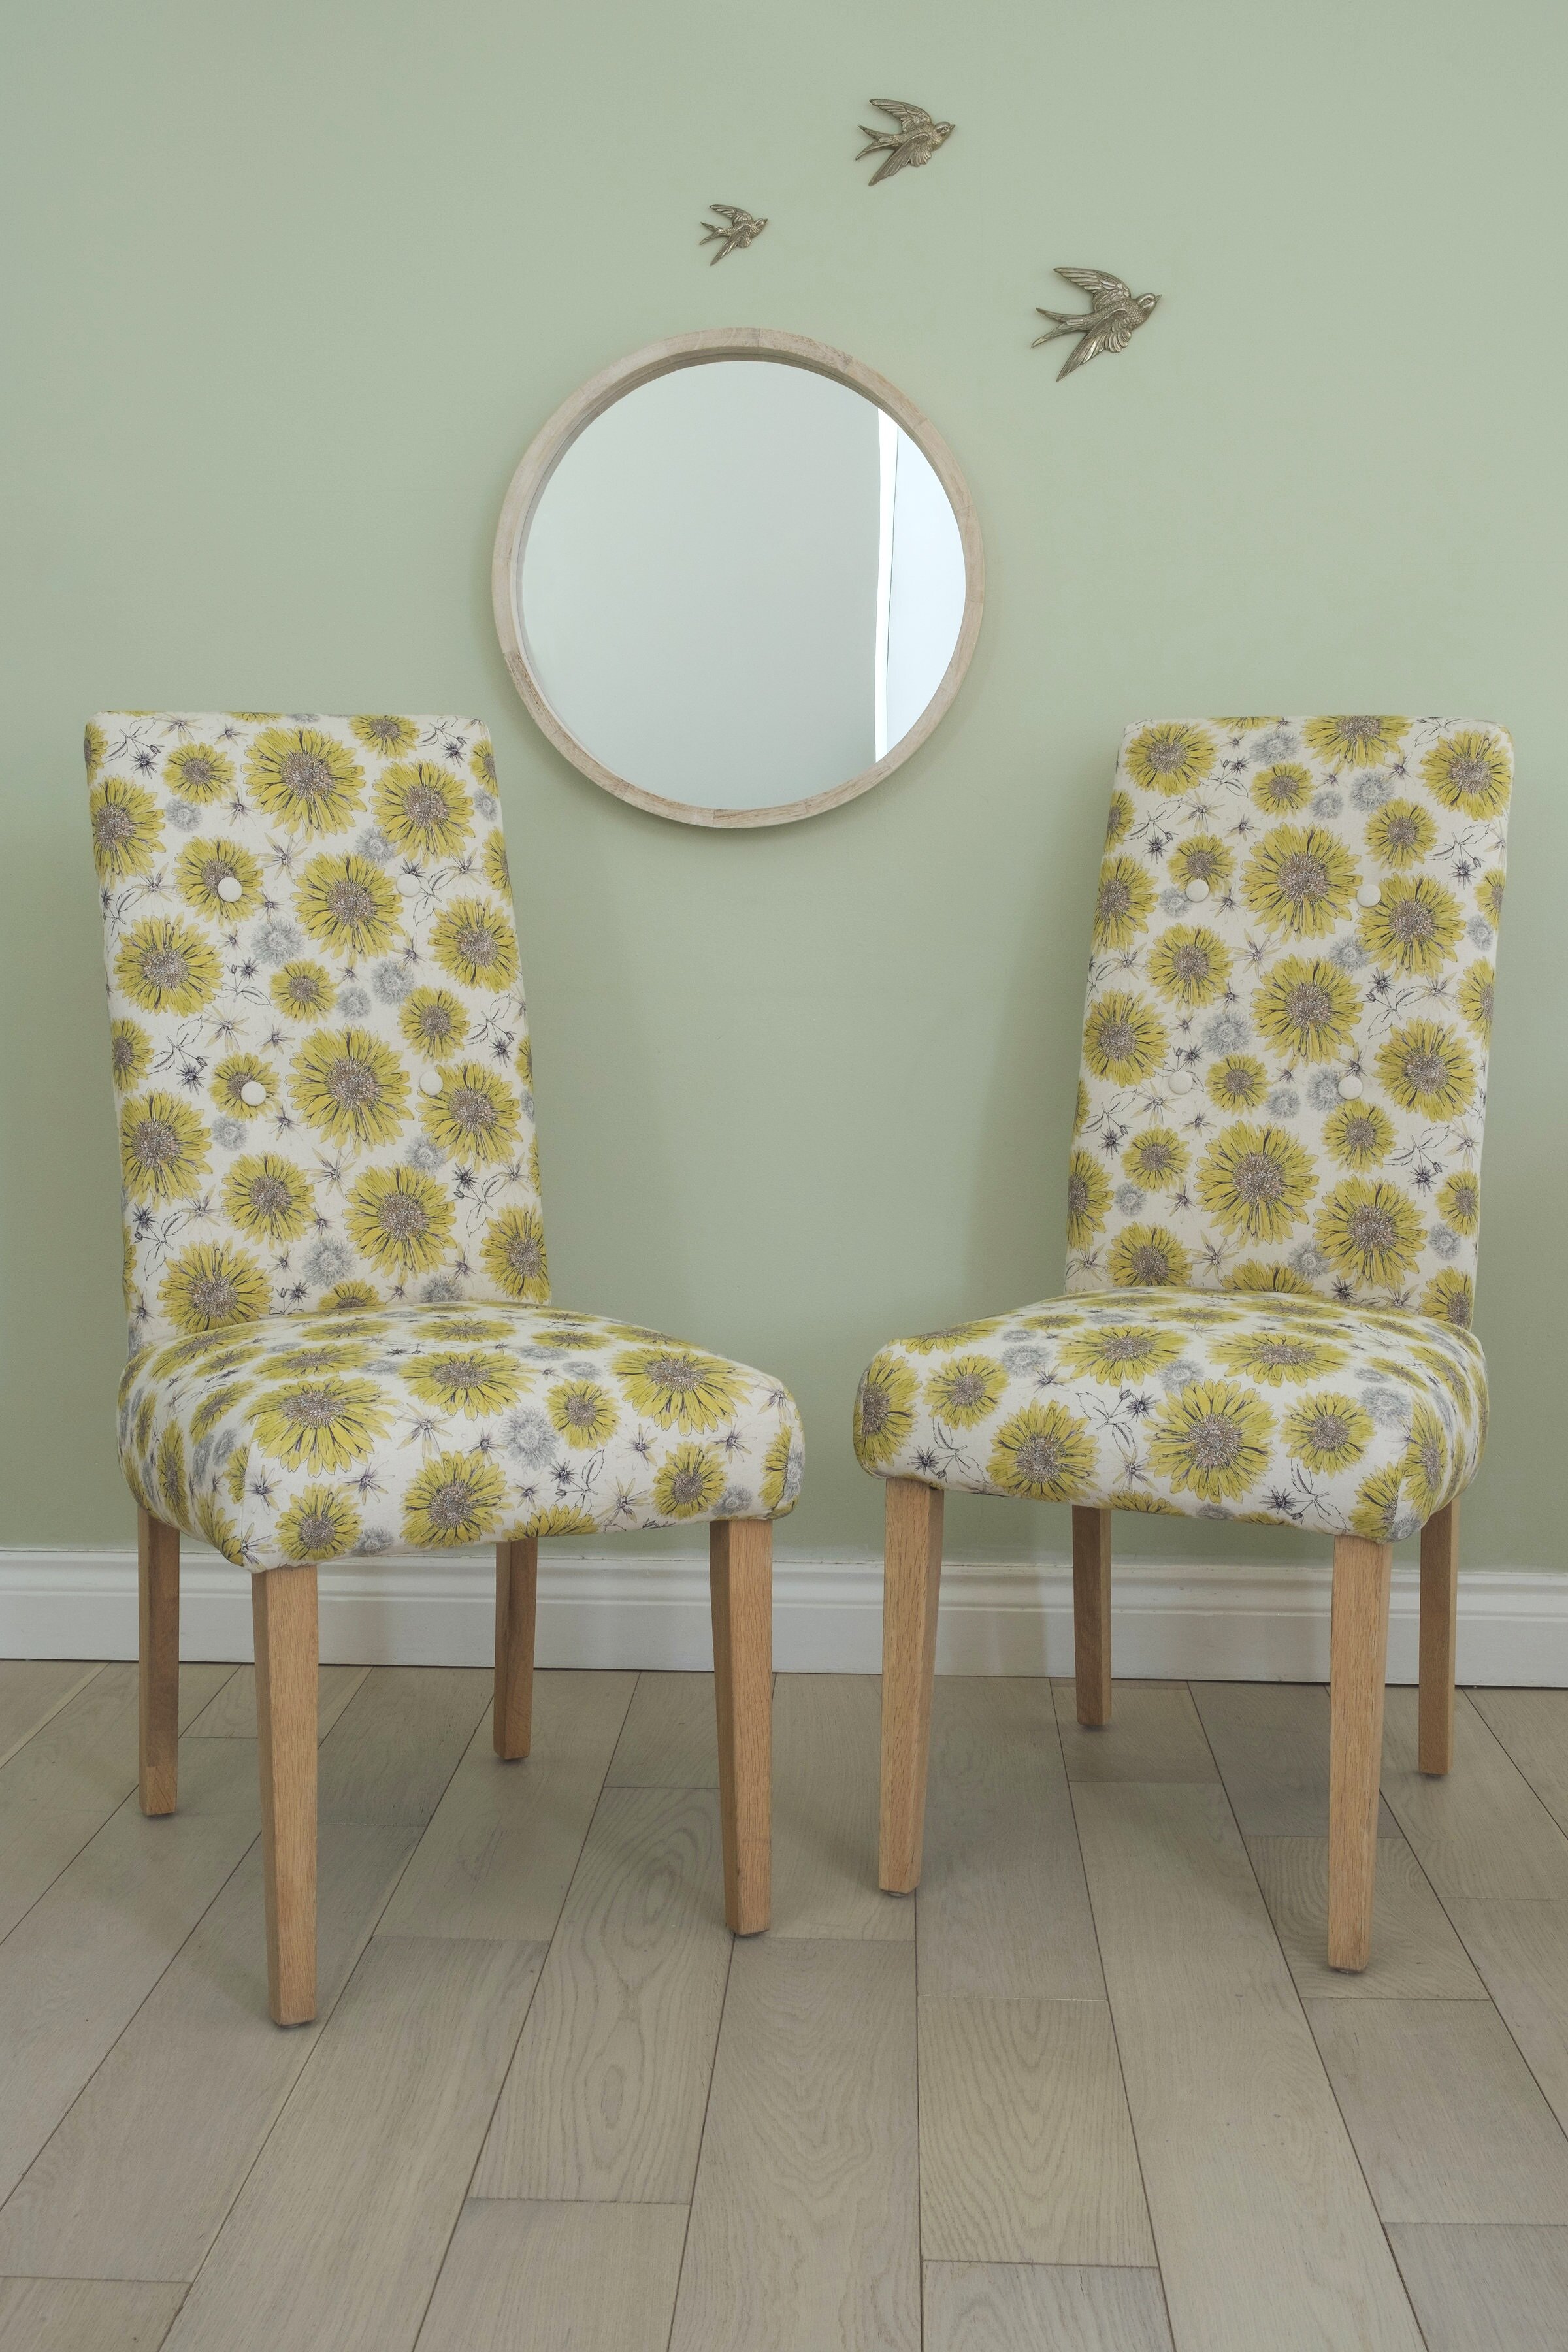 Chair Upholstered In Organic Sunflower Fabric Seed Home Designs